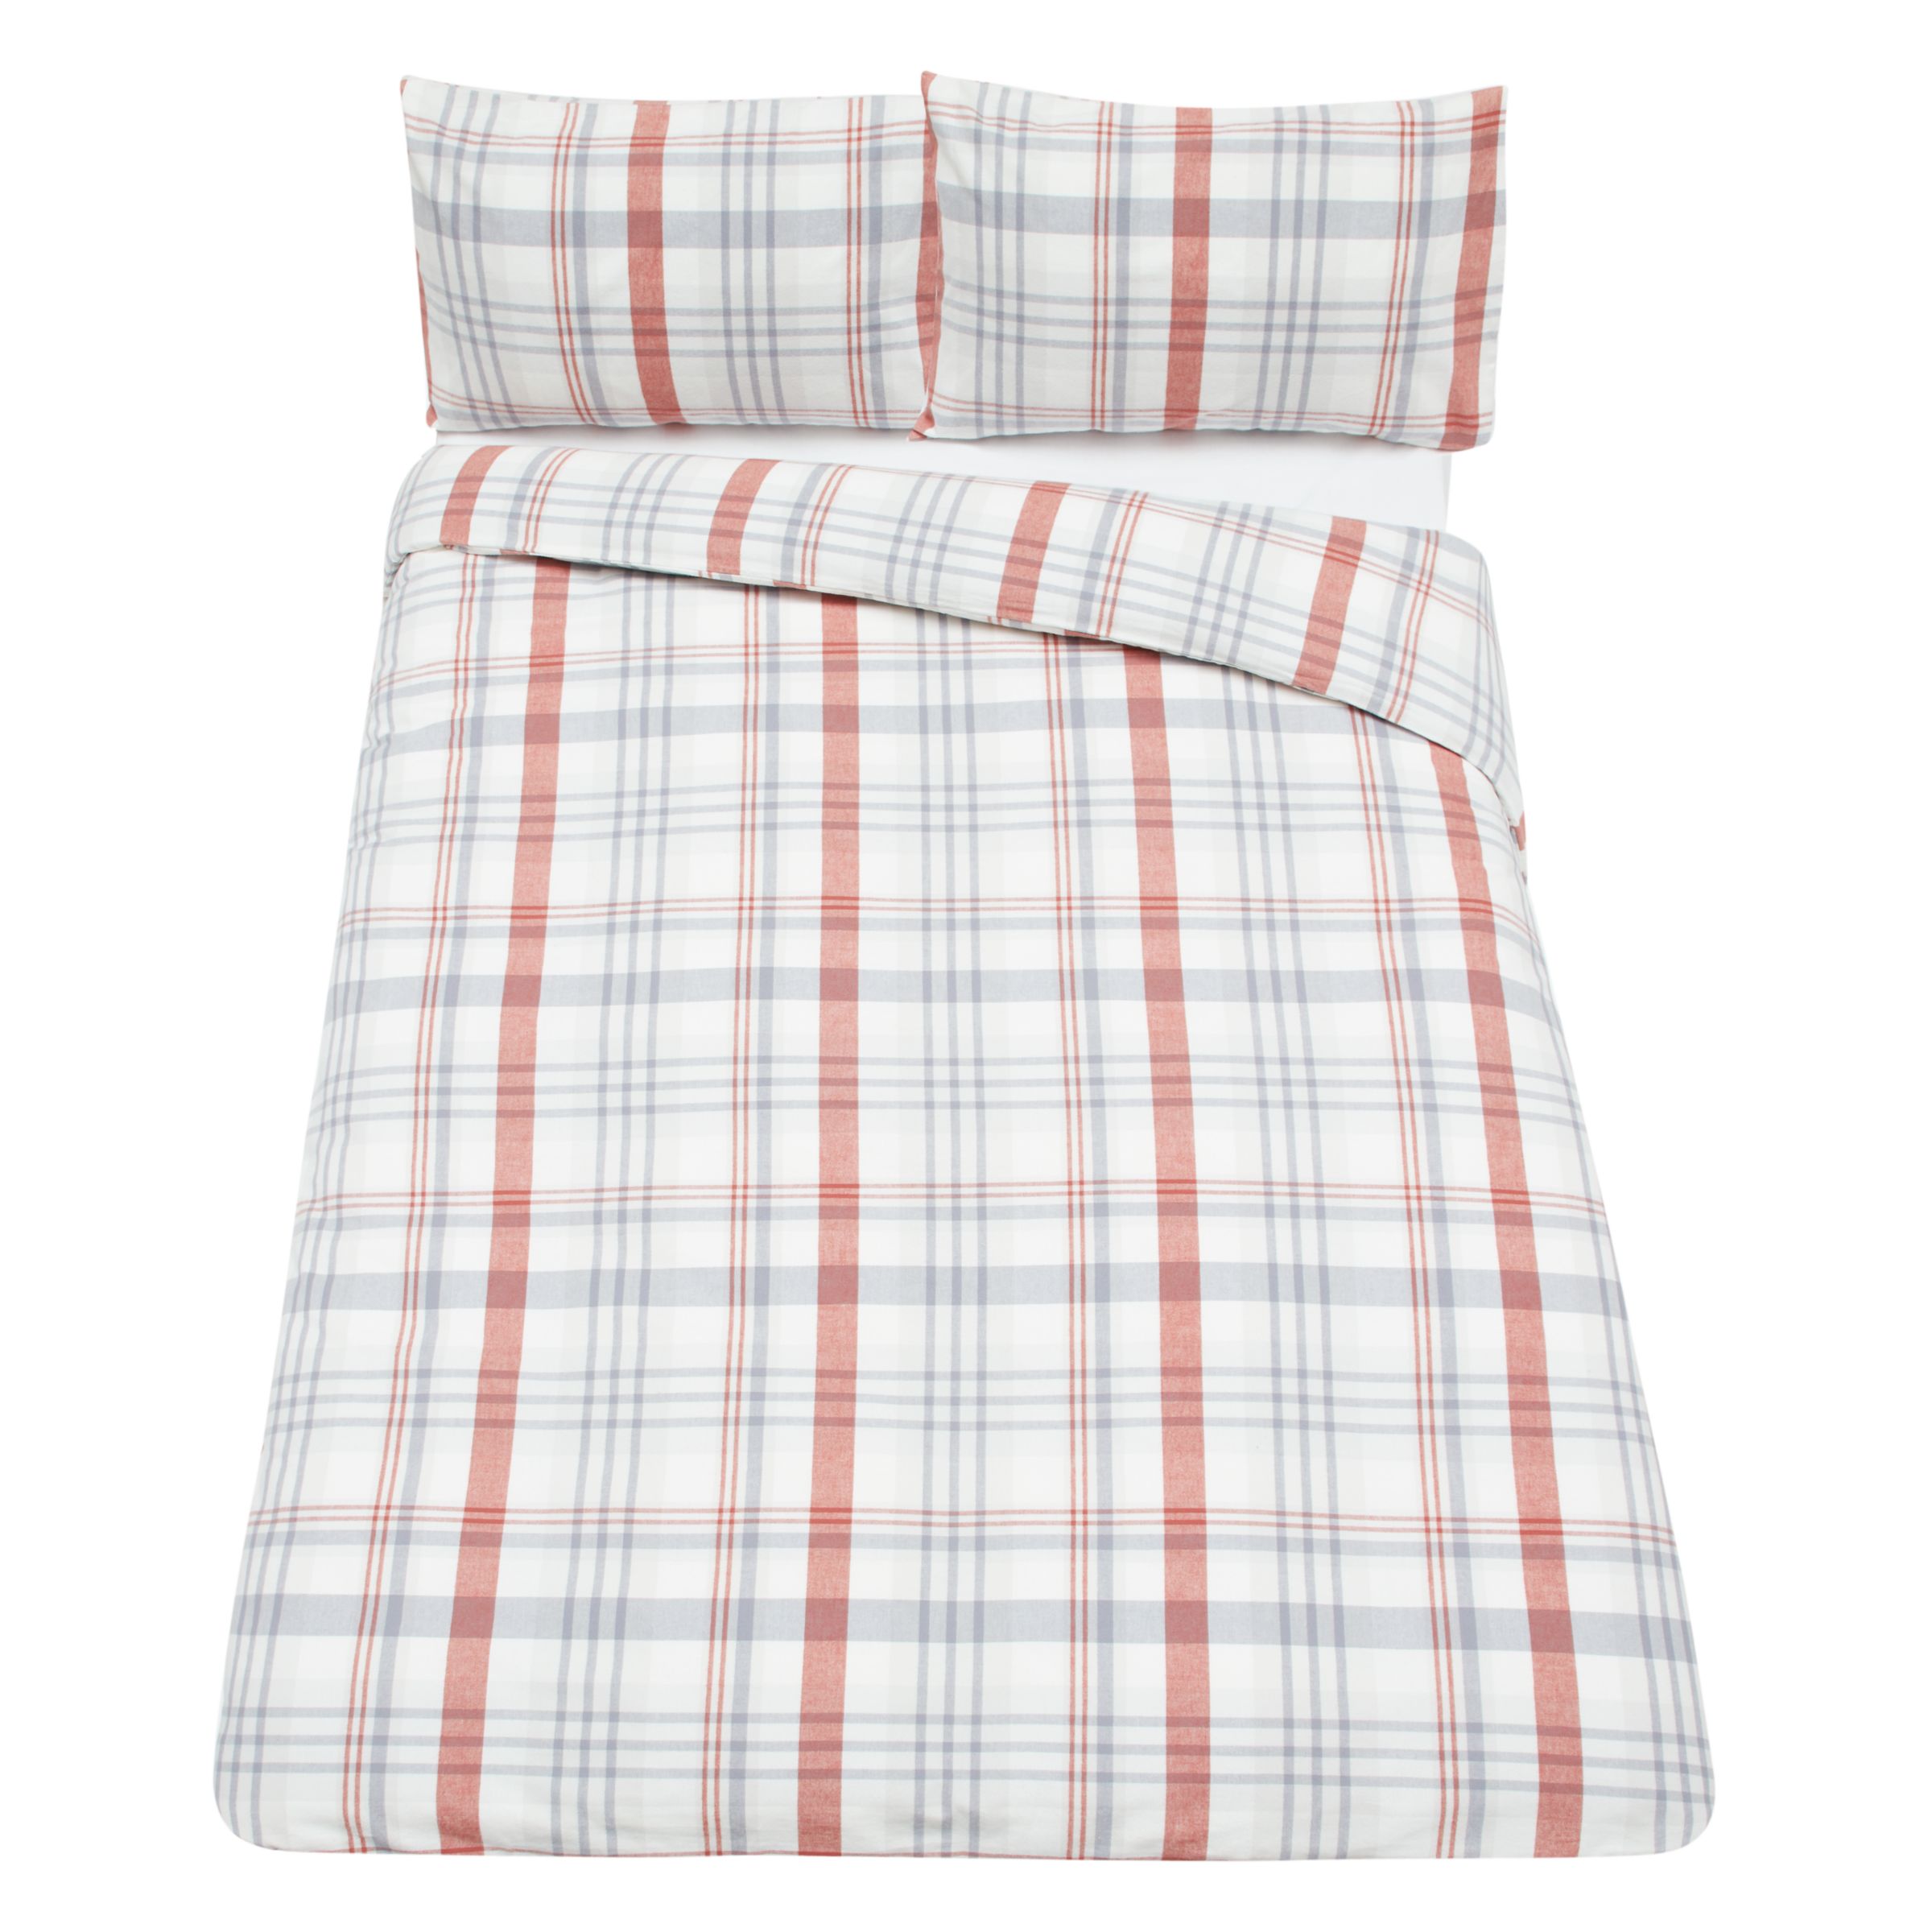 John Lewis Partners Appin Check Brushed Cotton Duvet Cover Set